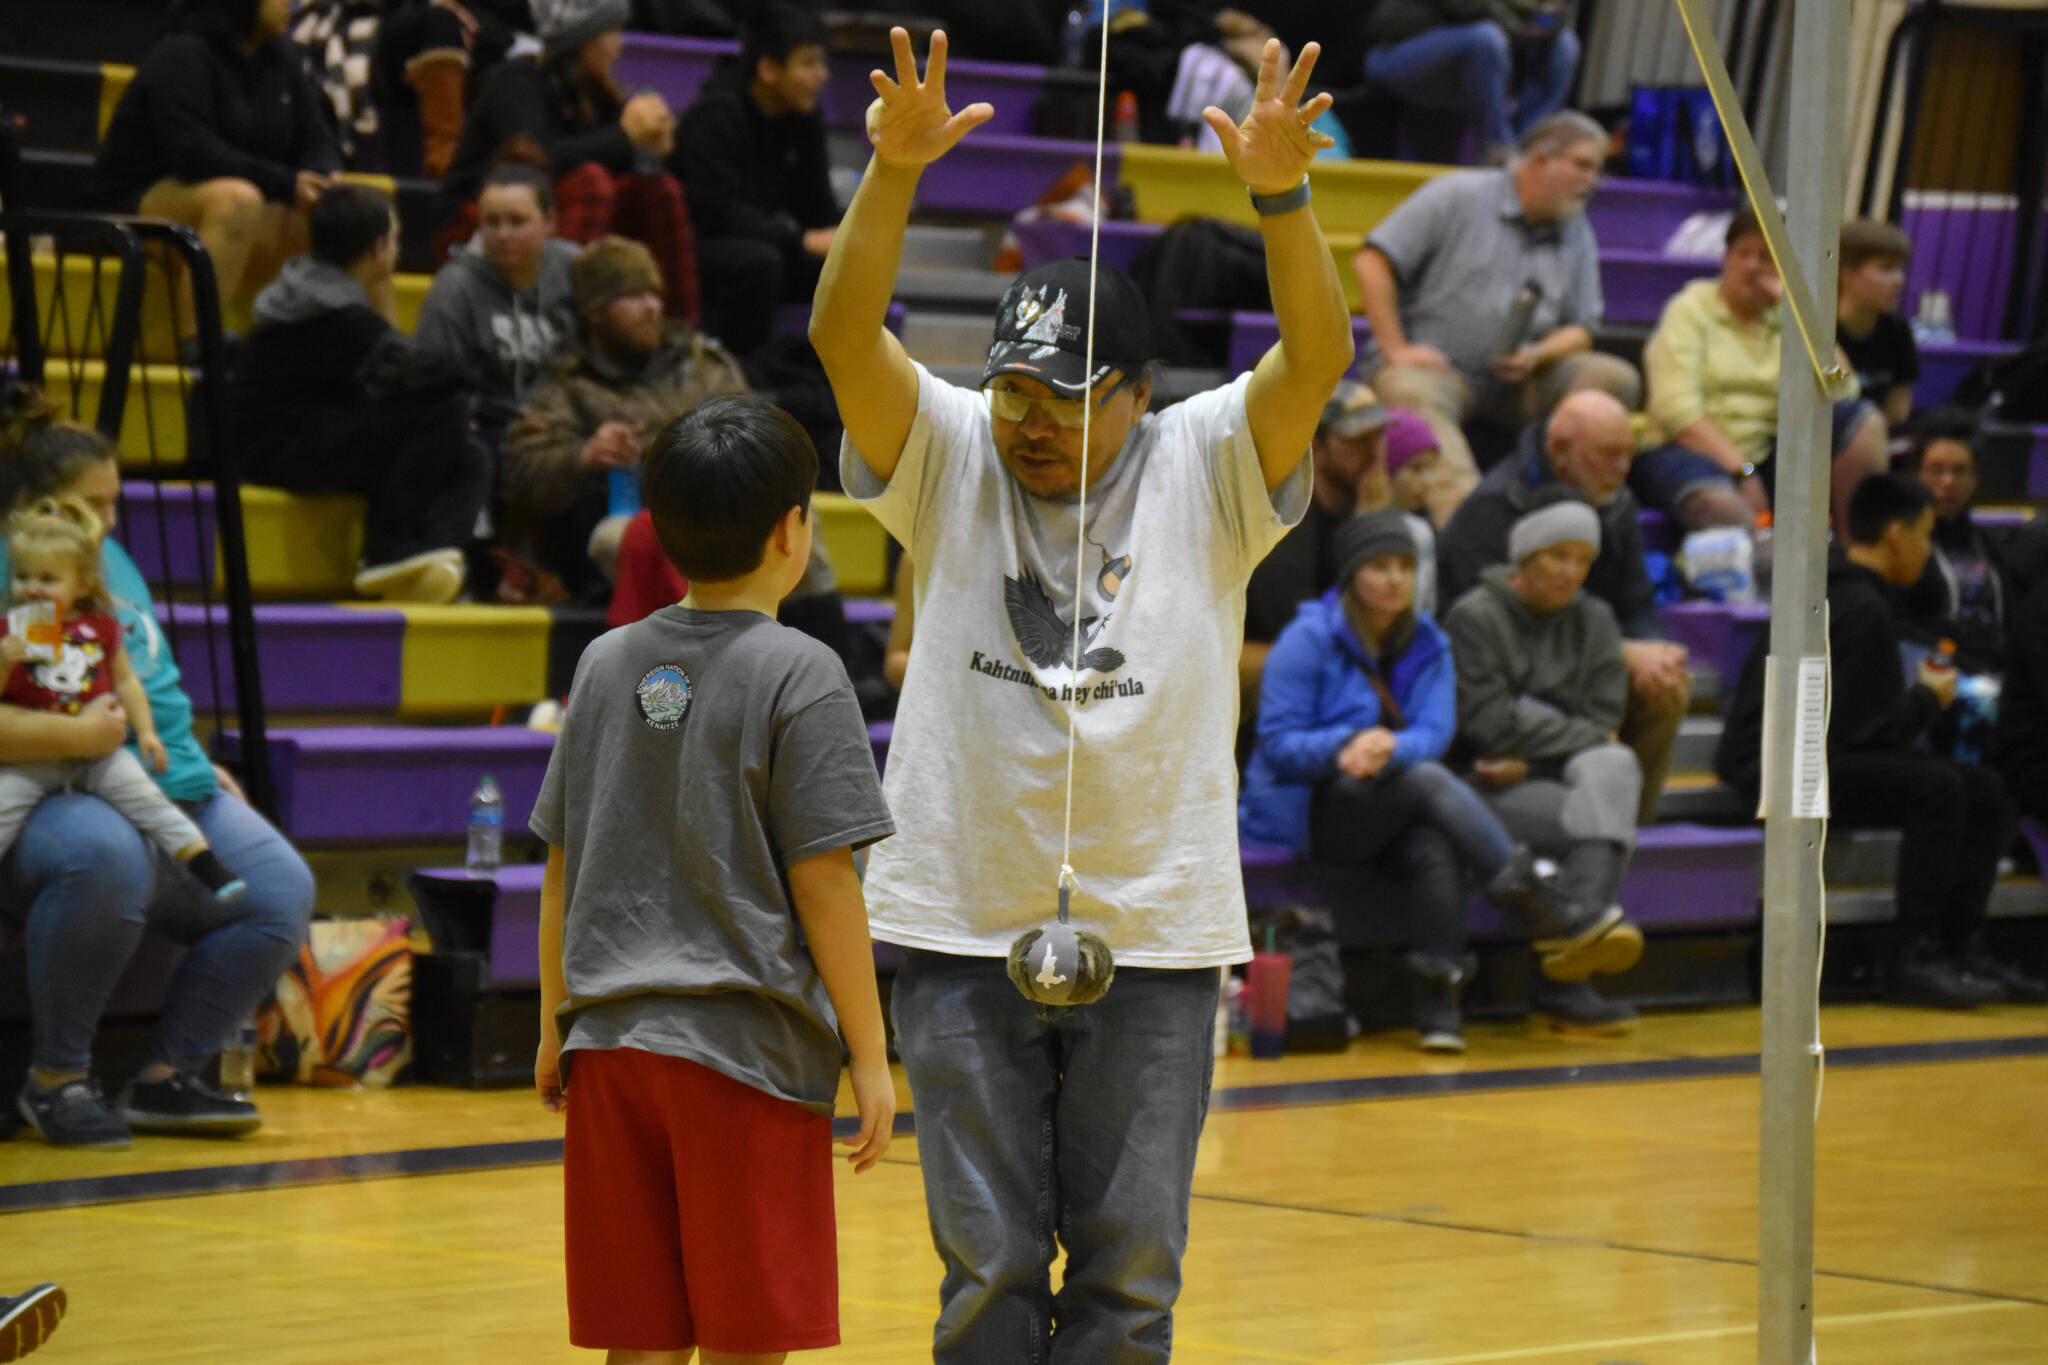 An official gives advice to a junior athlete competing for the Kenaitze Indian Tribe after the boy missed his first attempt at the 2-foot high kick during the Kahtnuht’ana Hey Chi’ula NYO Invitational on Saturday, Jan. 14, 2023, at Kenai Middle School in Kenai, Alaska. (Jake Dye/Peninsula Clarion)